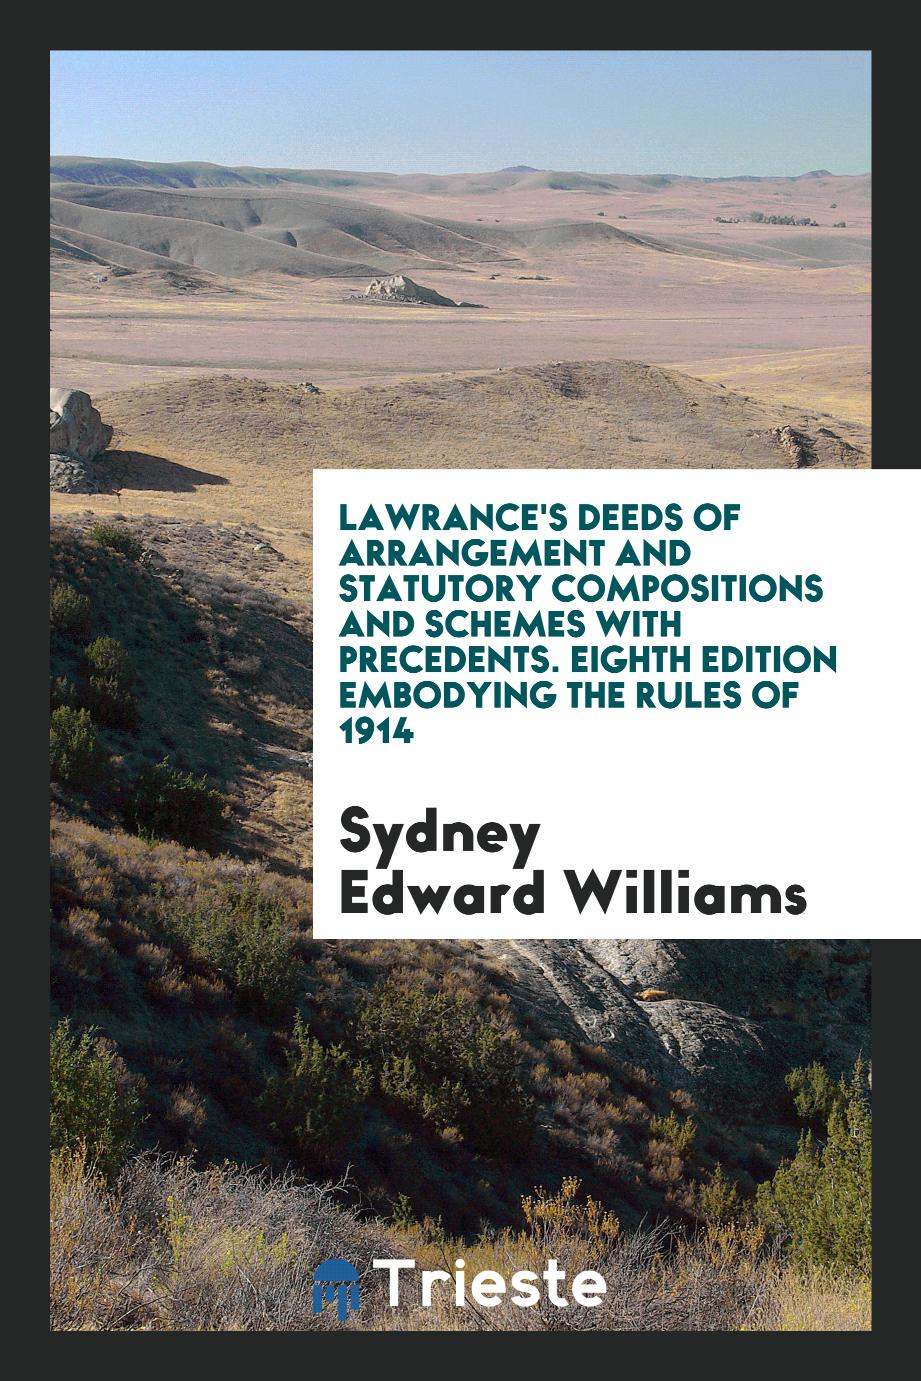 Lawrance's deeds of arrangement and statutory compositions and schemes with precedents. Eighth edition embodying the rules of 1914